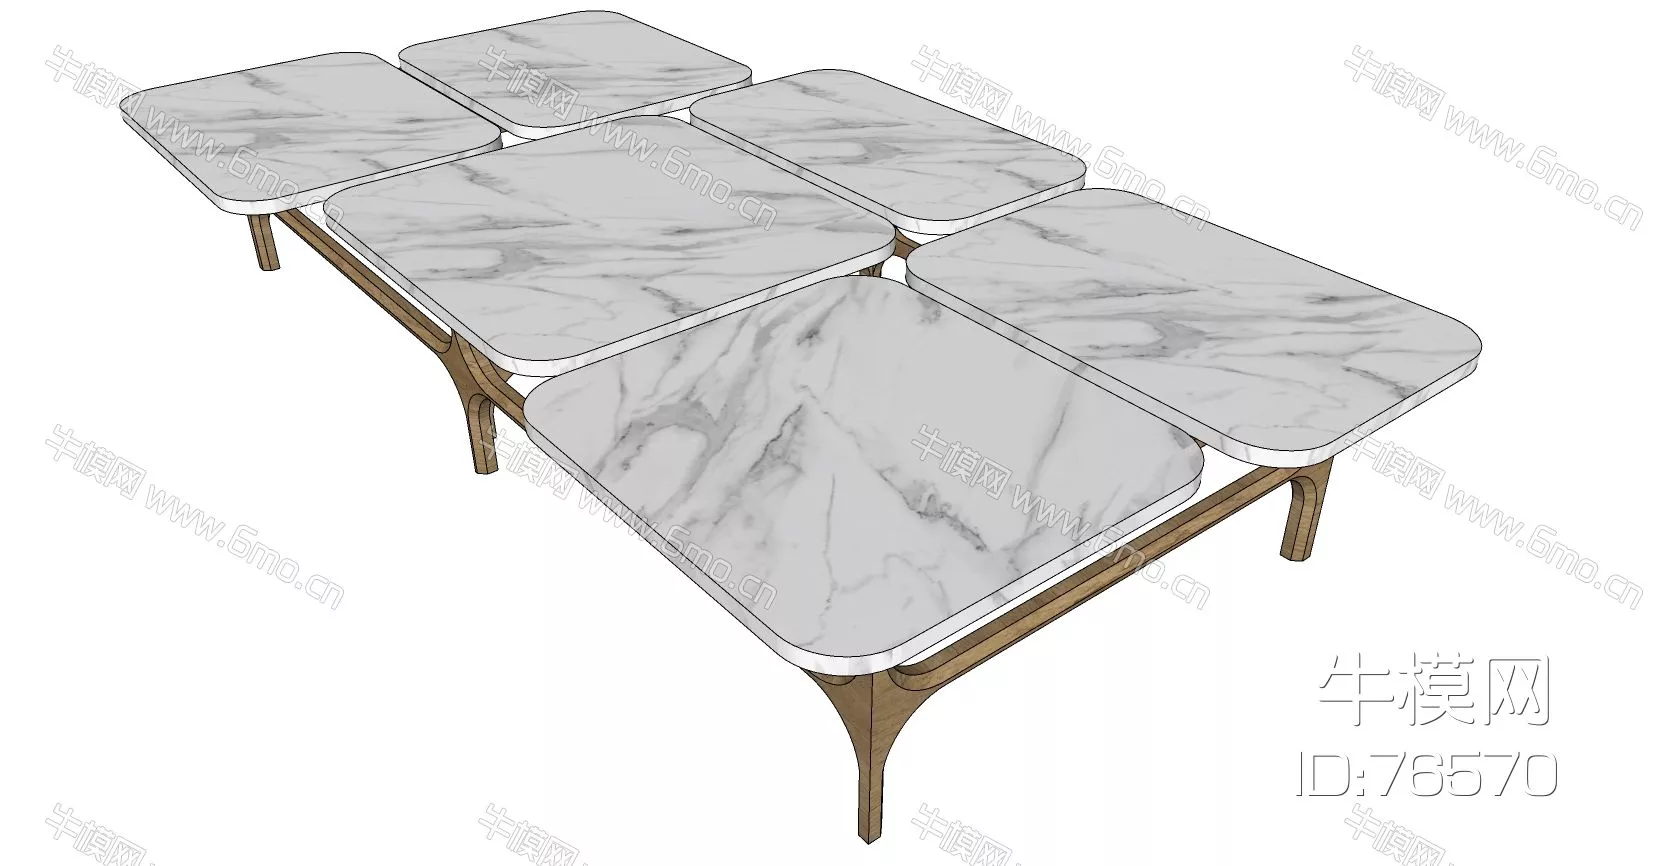 MODERN COFFEE TABLE - SKETCHUP 3D MODEL - ENSCAPE - 76570